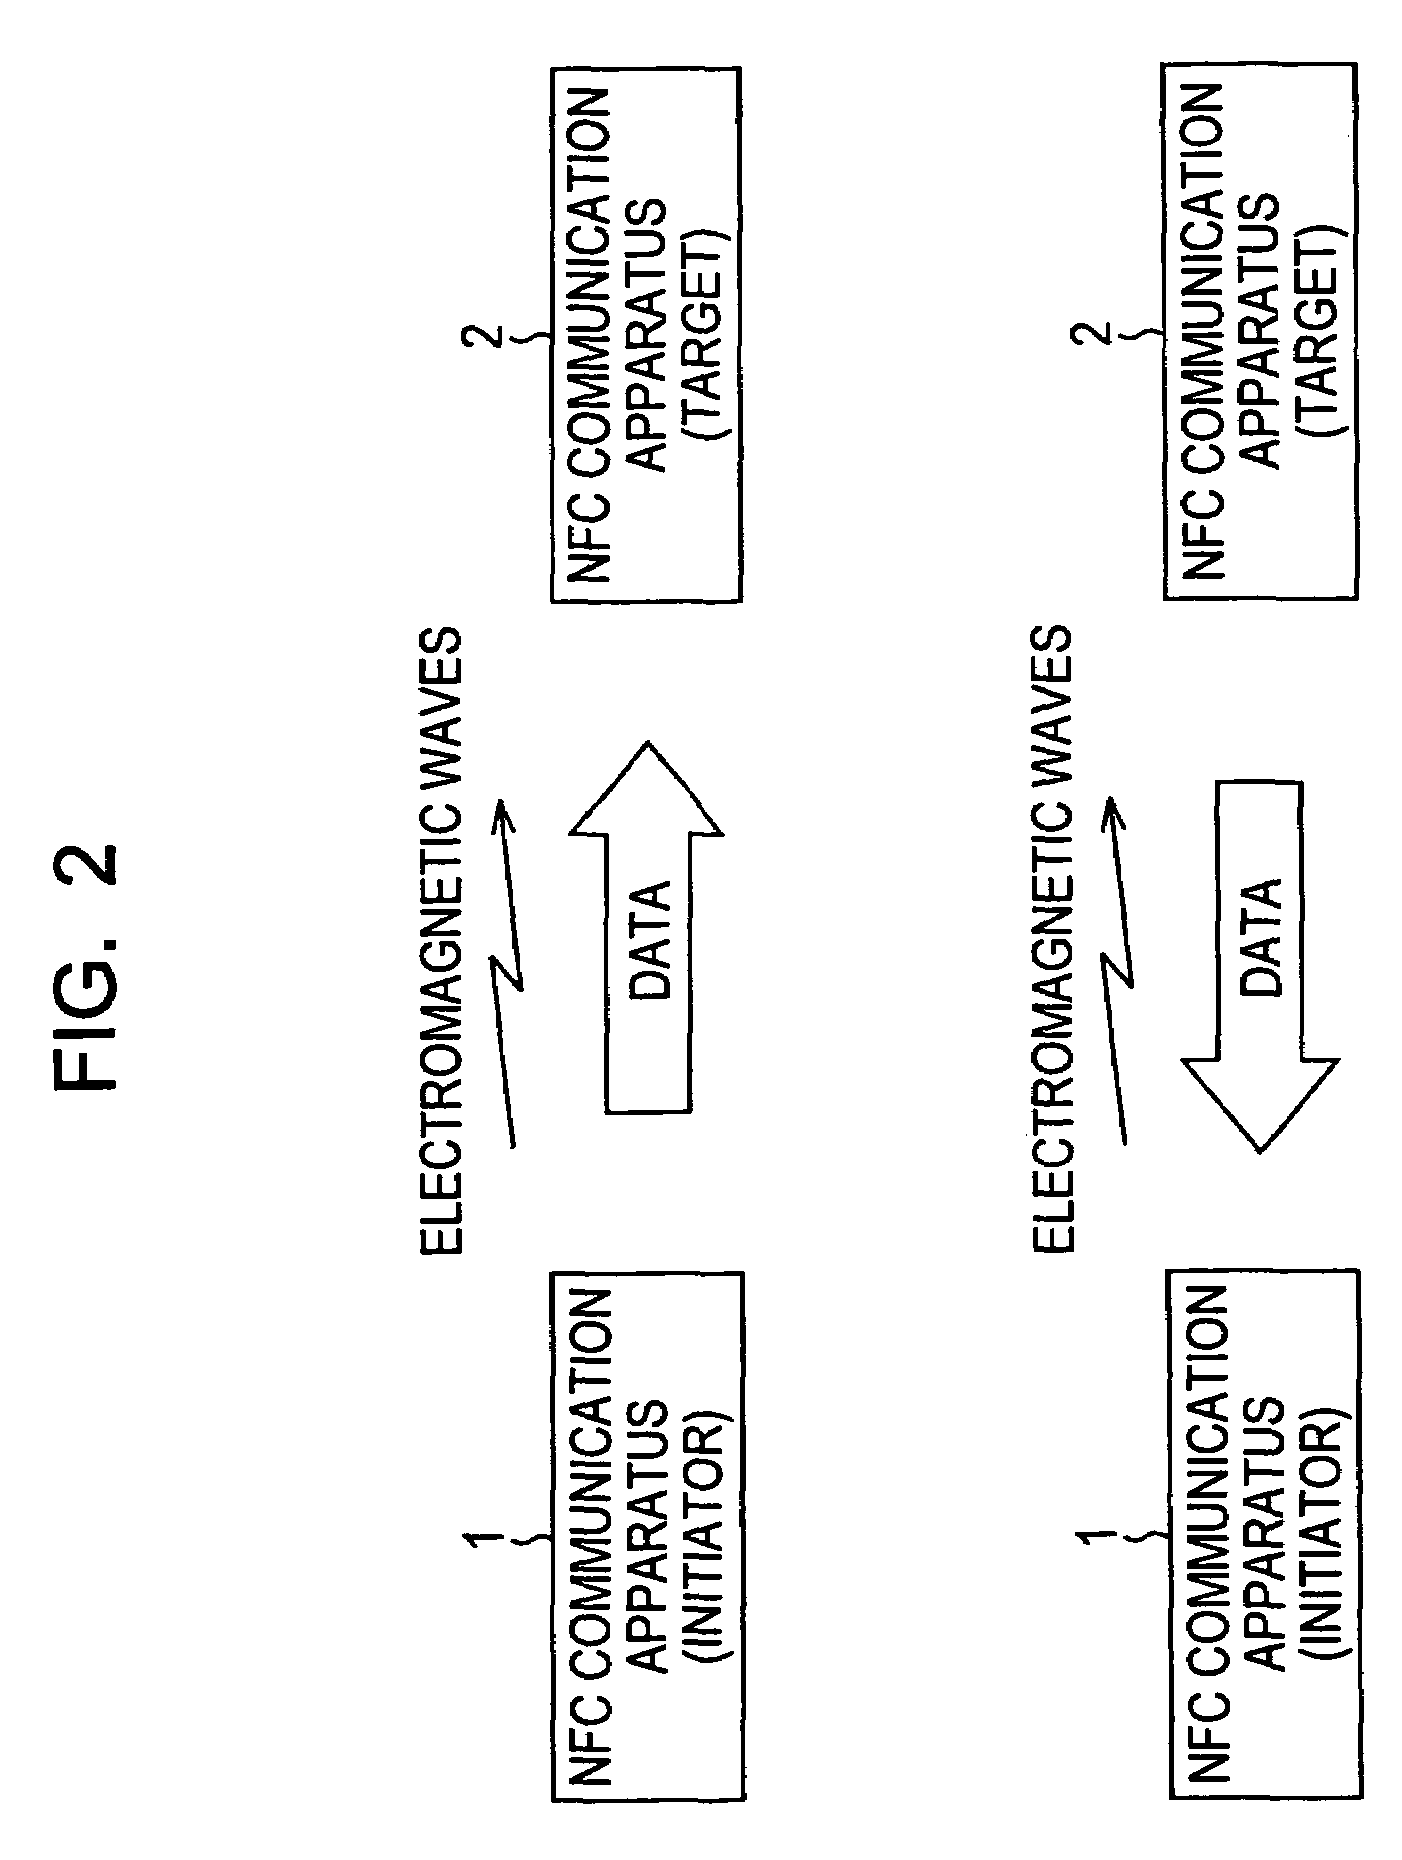 Communication system, communication method, and data processing apparatus